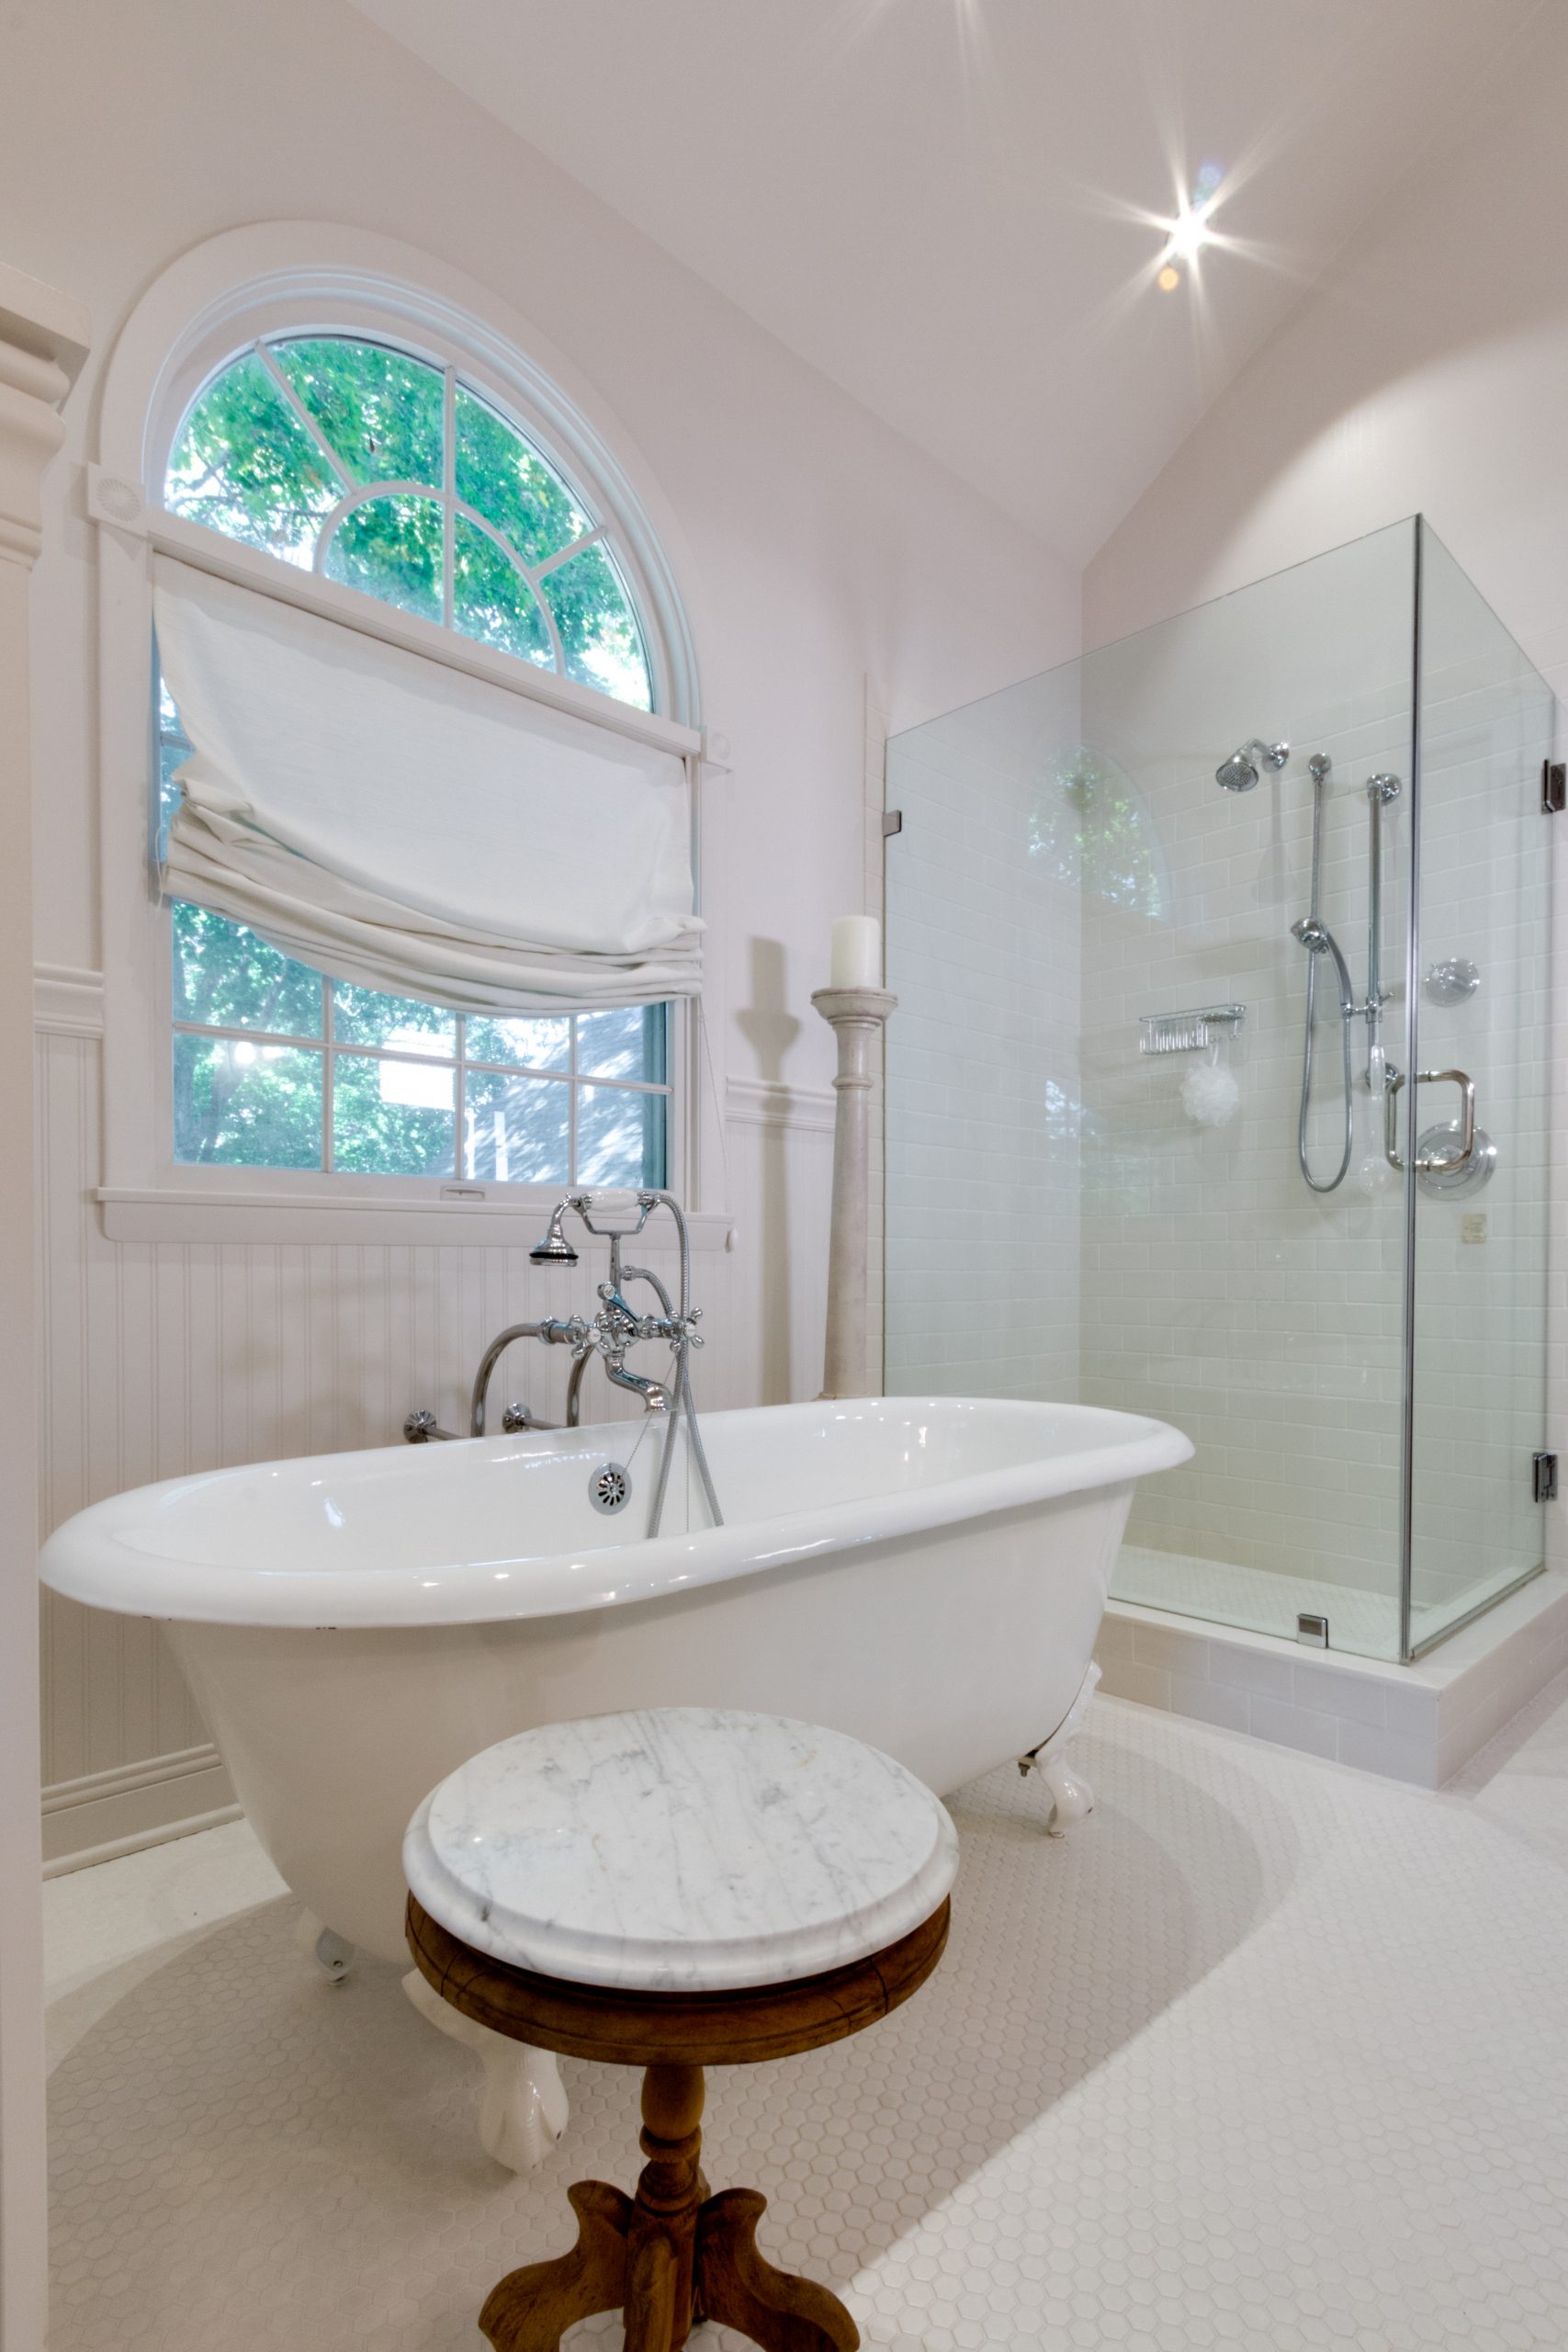 bathroom remodel with white tile, clawfoot tub and glass walk-in shower